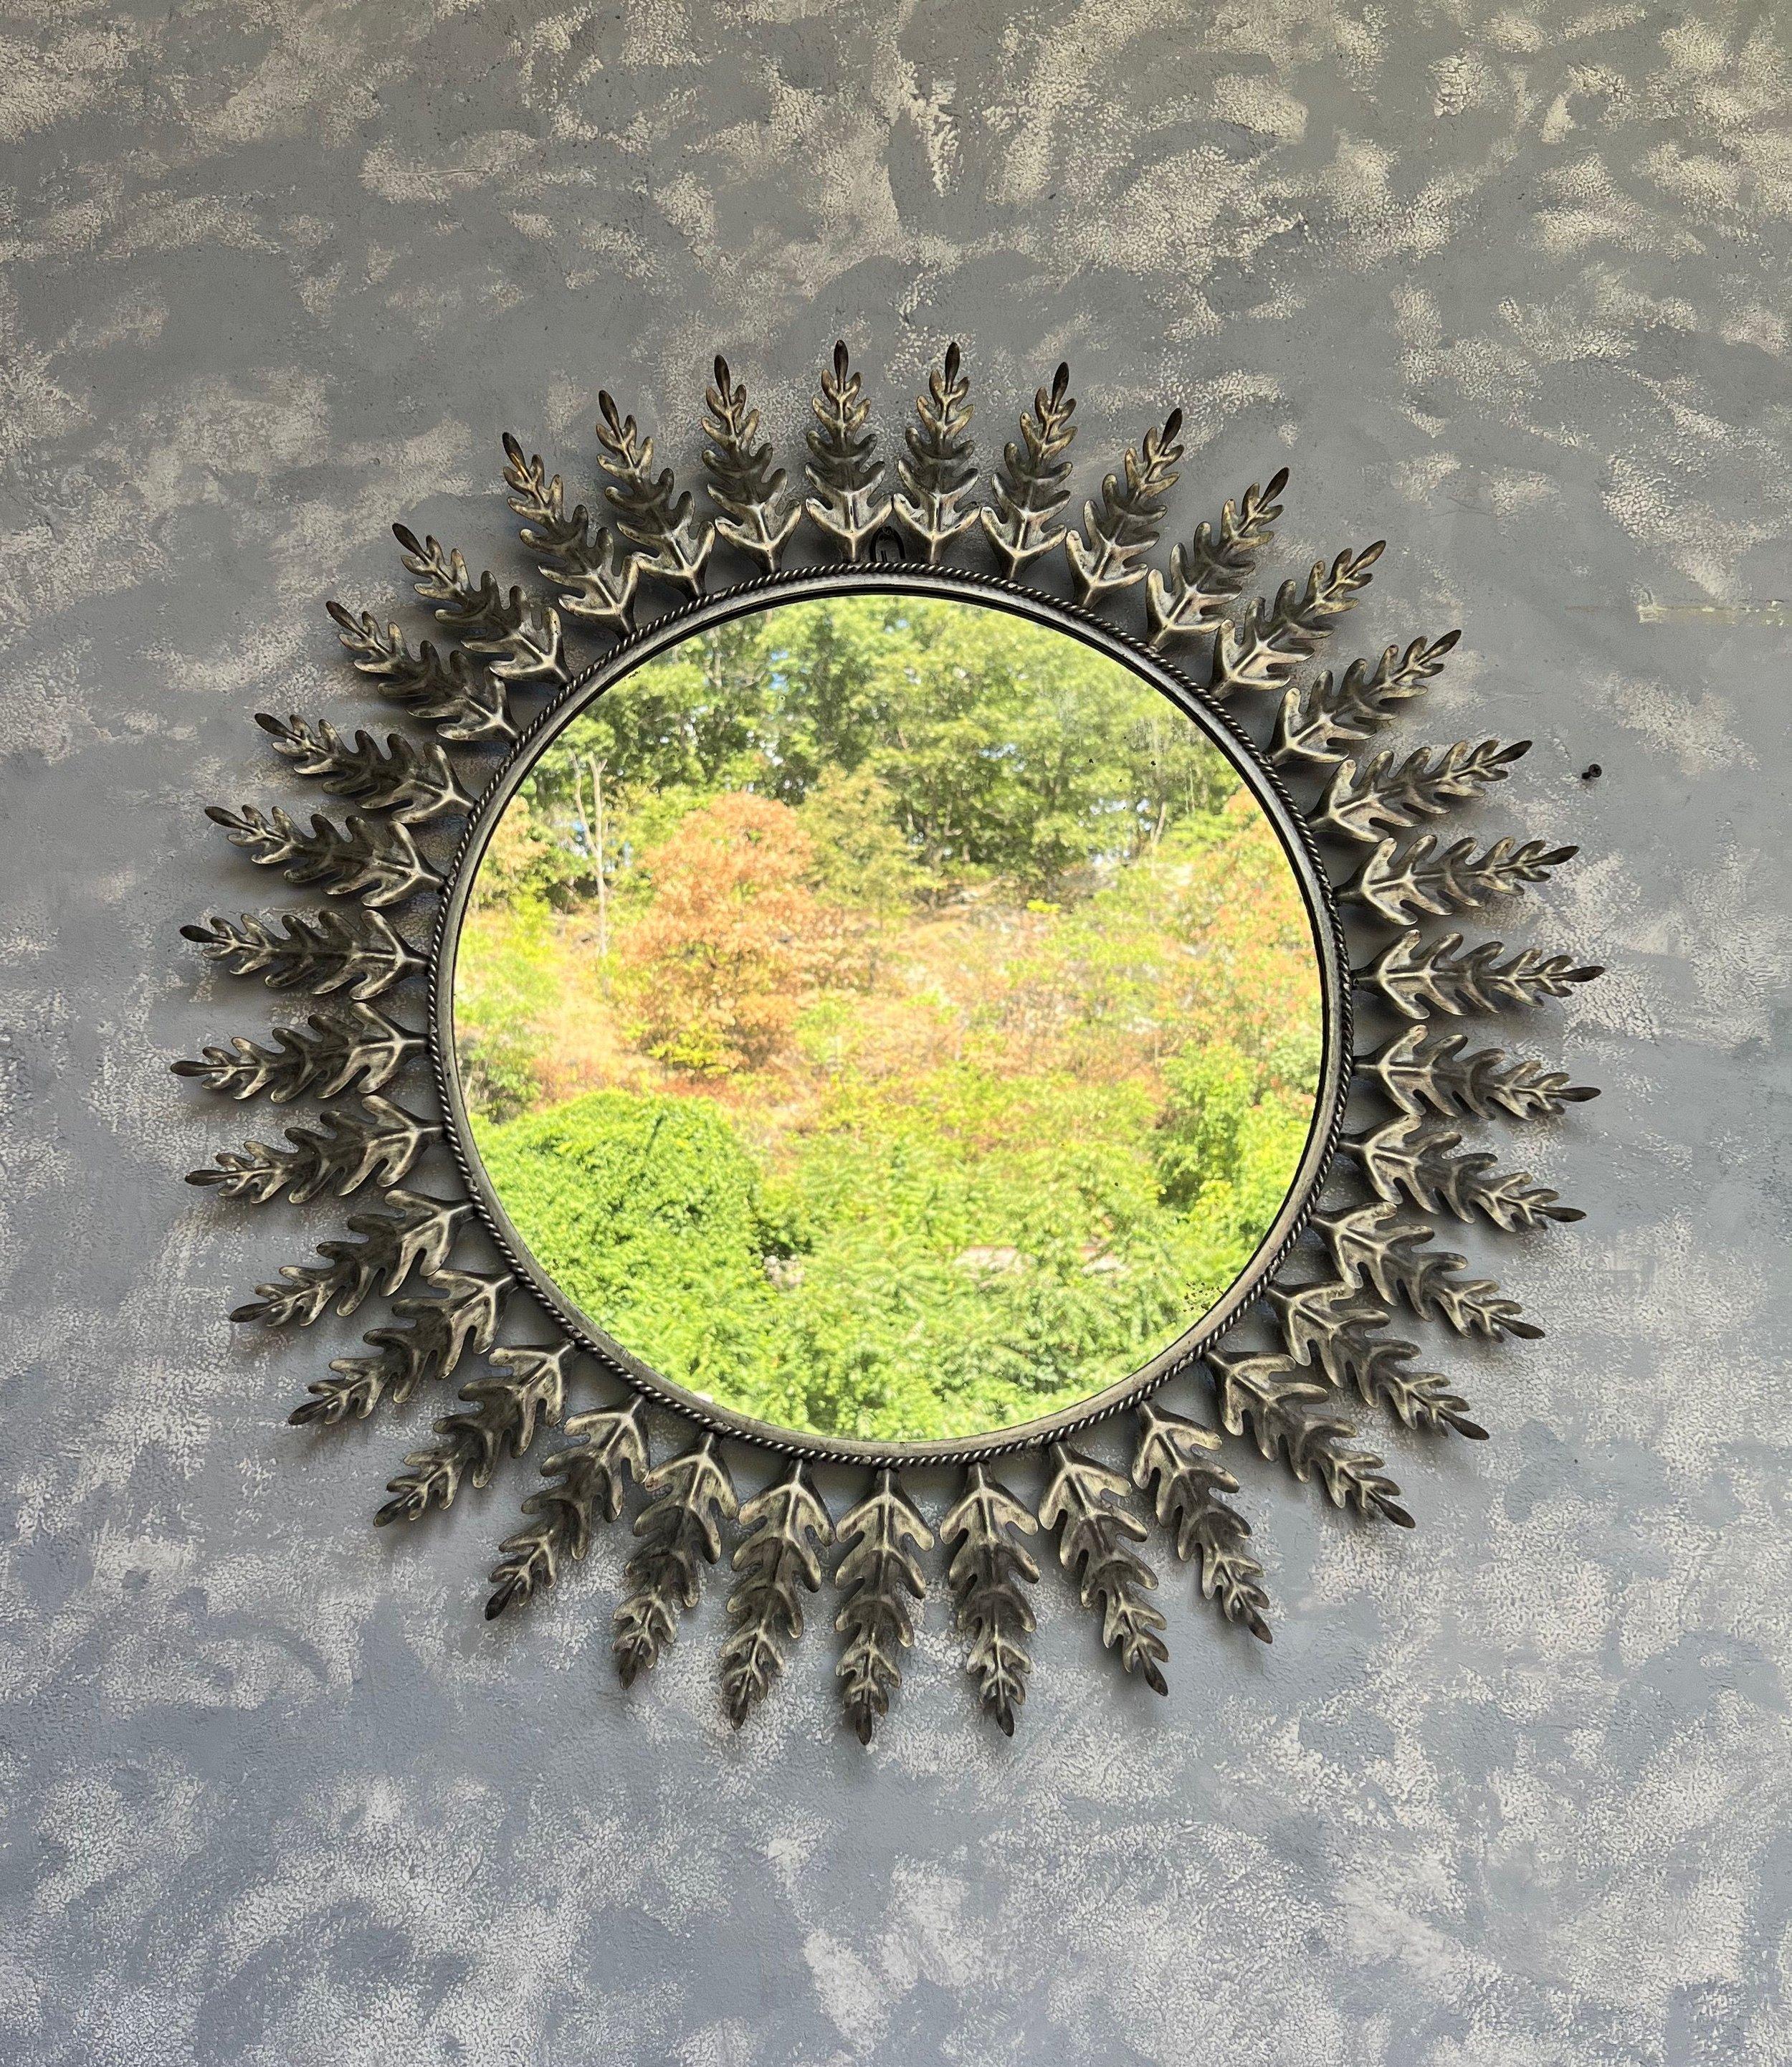 This unique large mid century round sunburst mirror features evenly spaced leaves surrounding a braided interior frame. The metal has a rich, silvered patina. We have added a felt backing to give the mirror more protection and a more finished look,